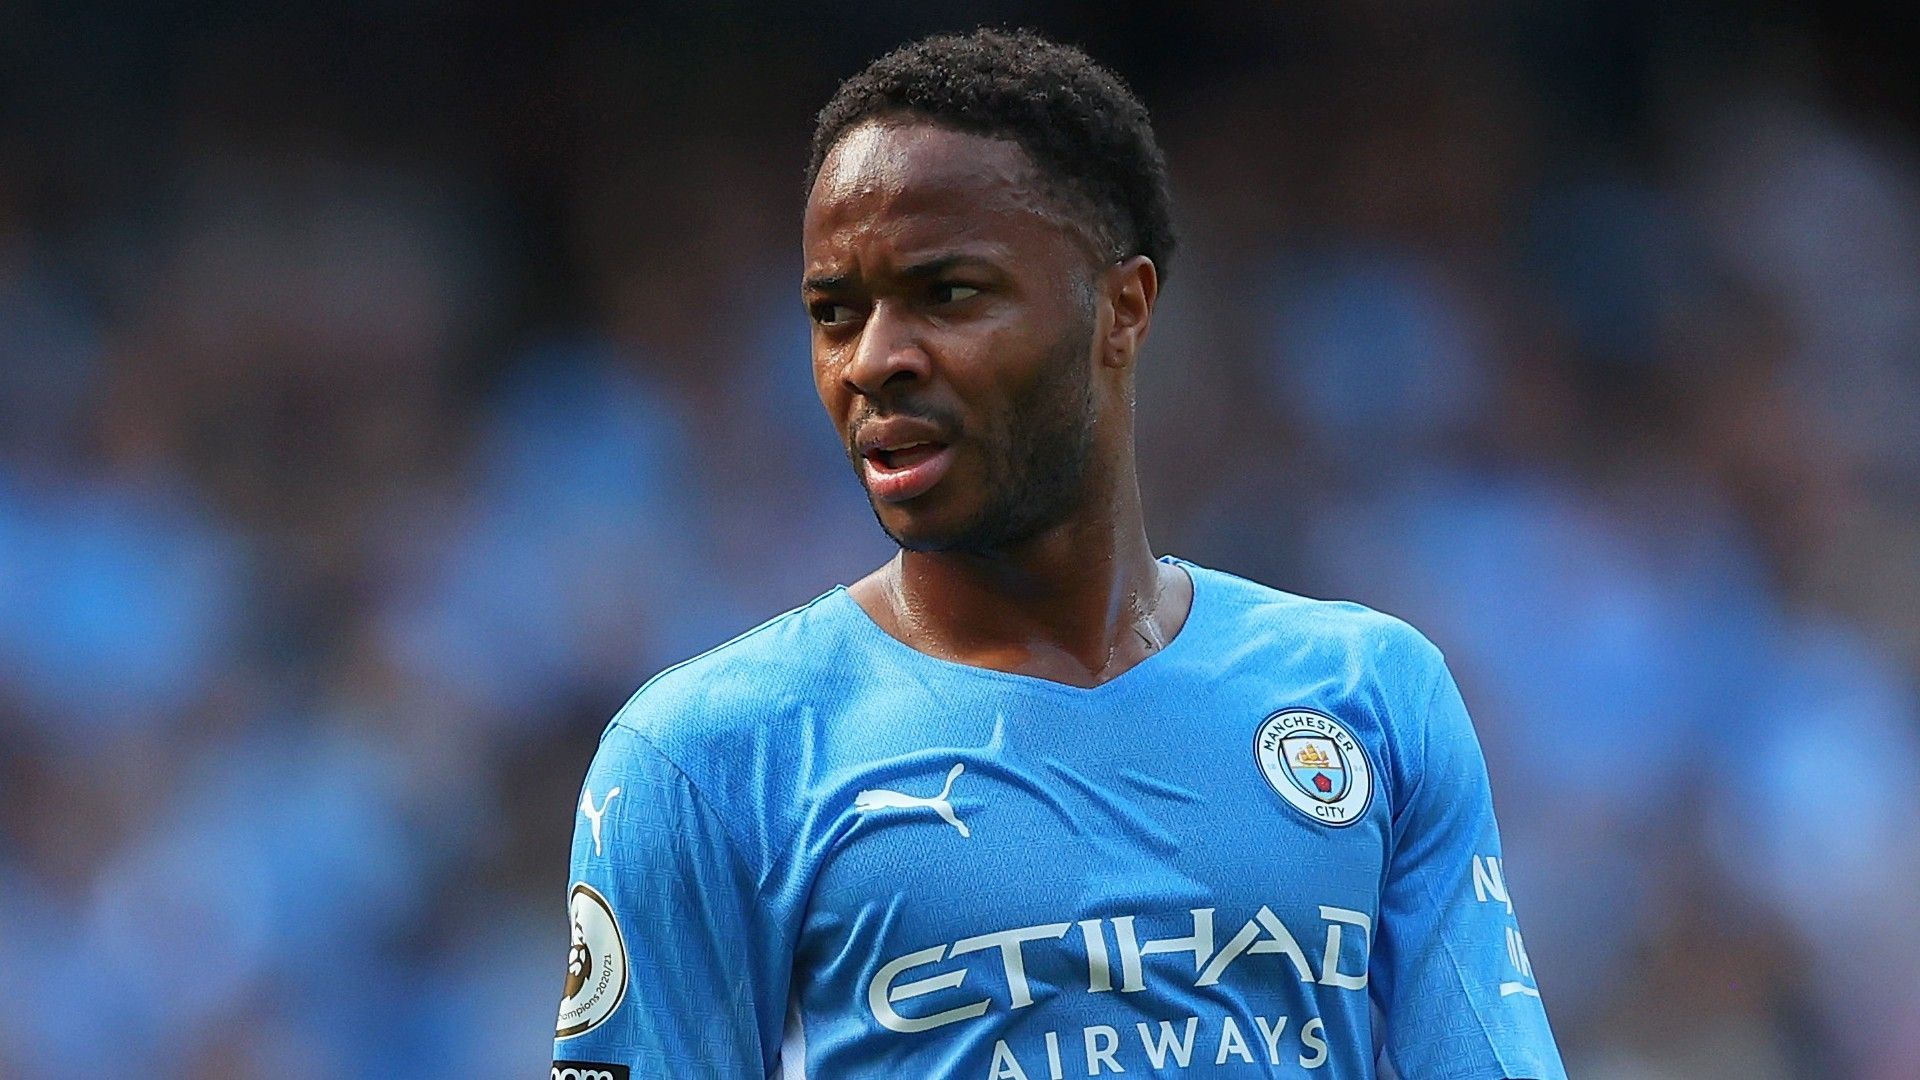 Sterling has had a difficult 2021-22 campaign, but remains valuable to City